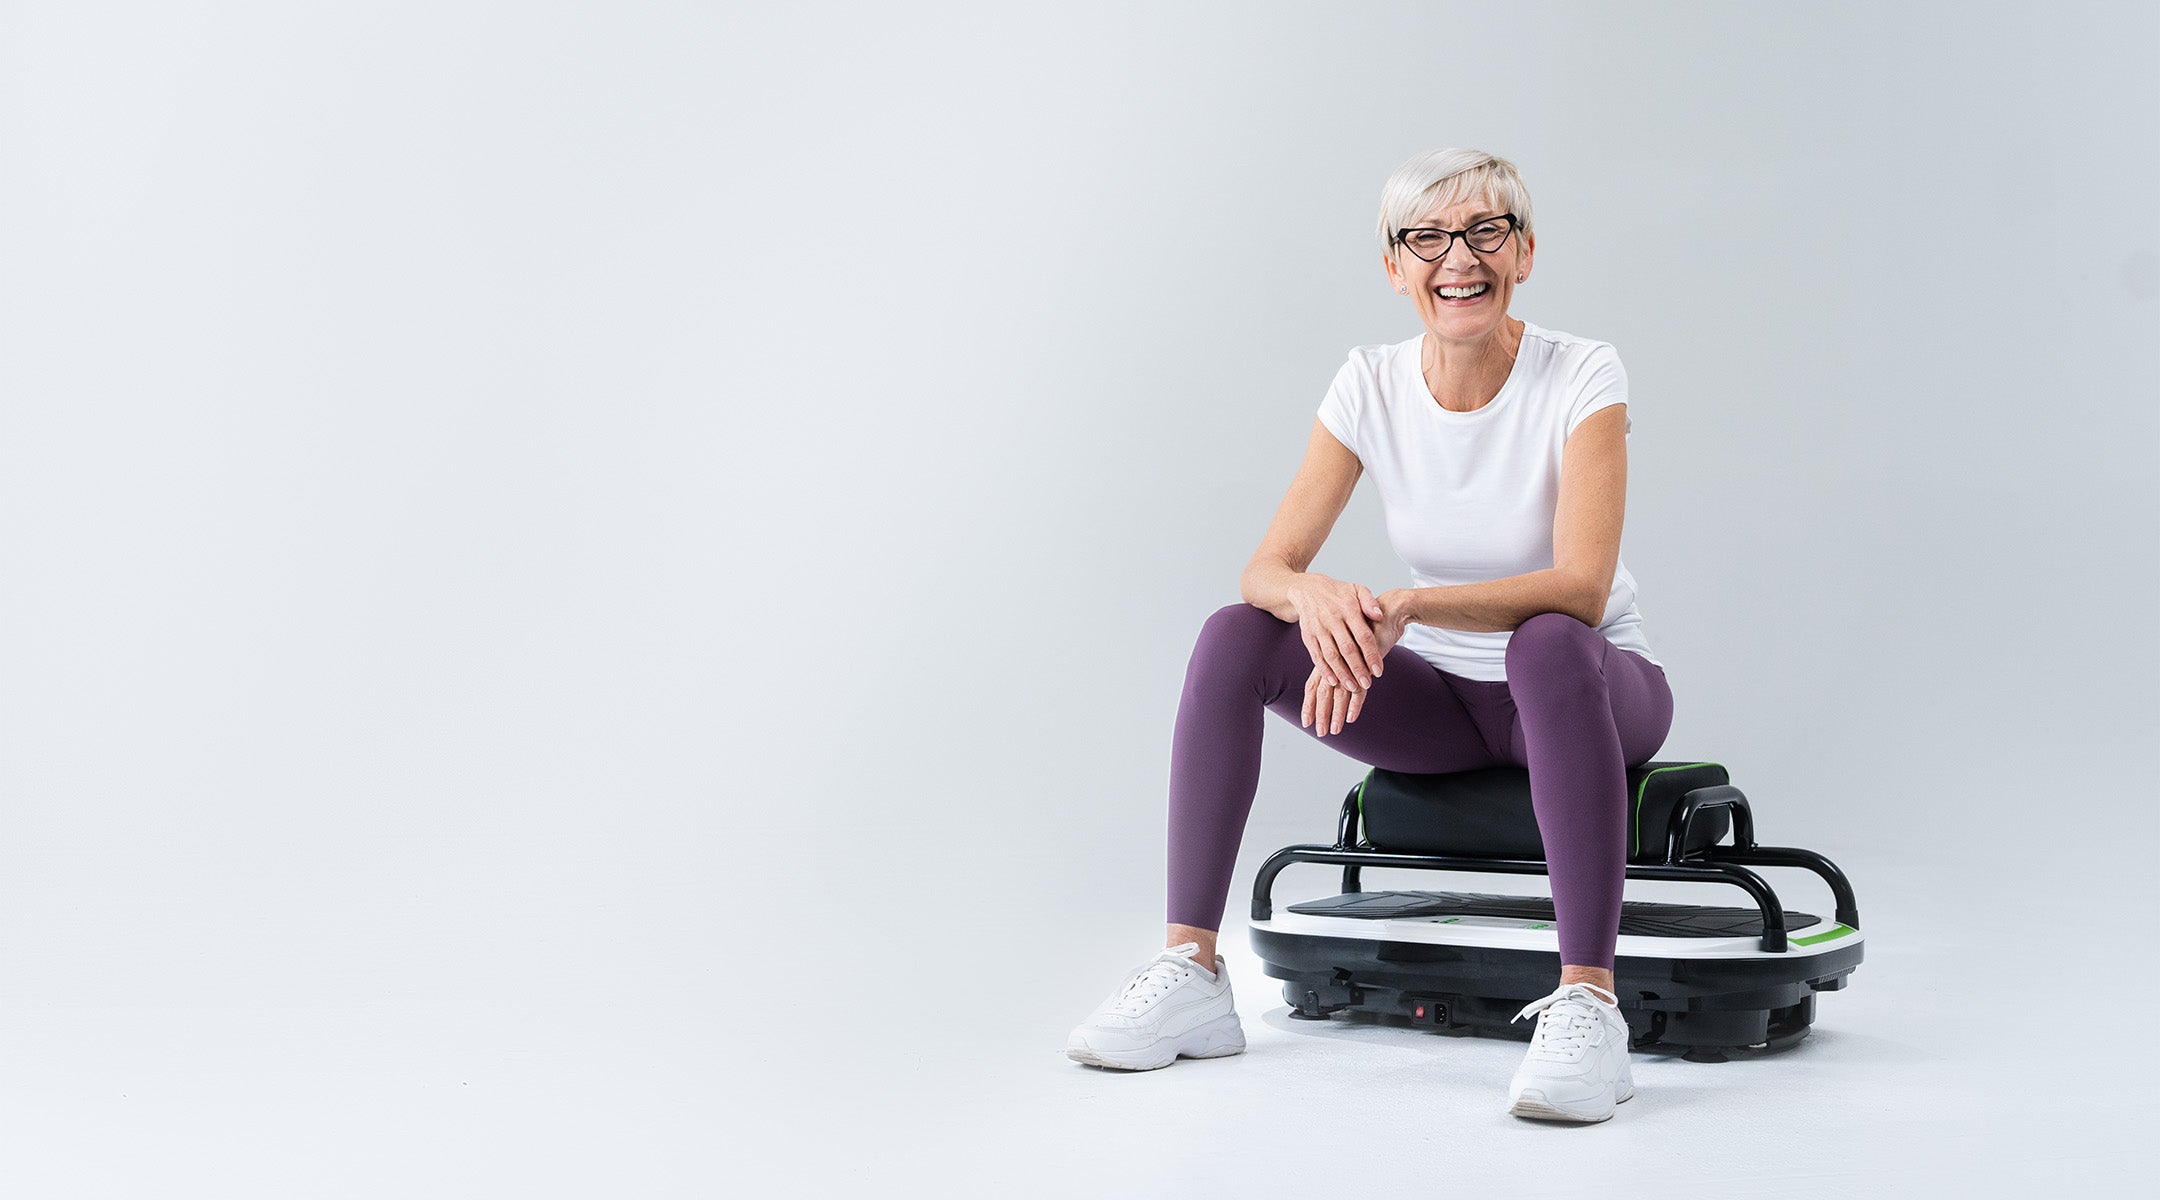 woman smiling and sitting on vibrating exercise machine with seat